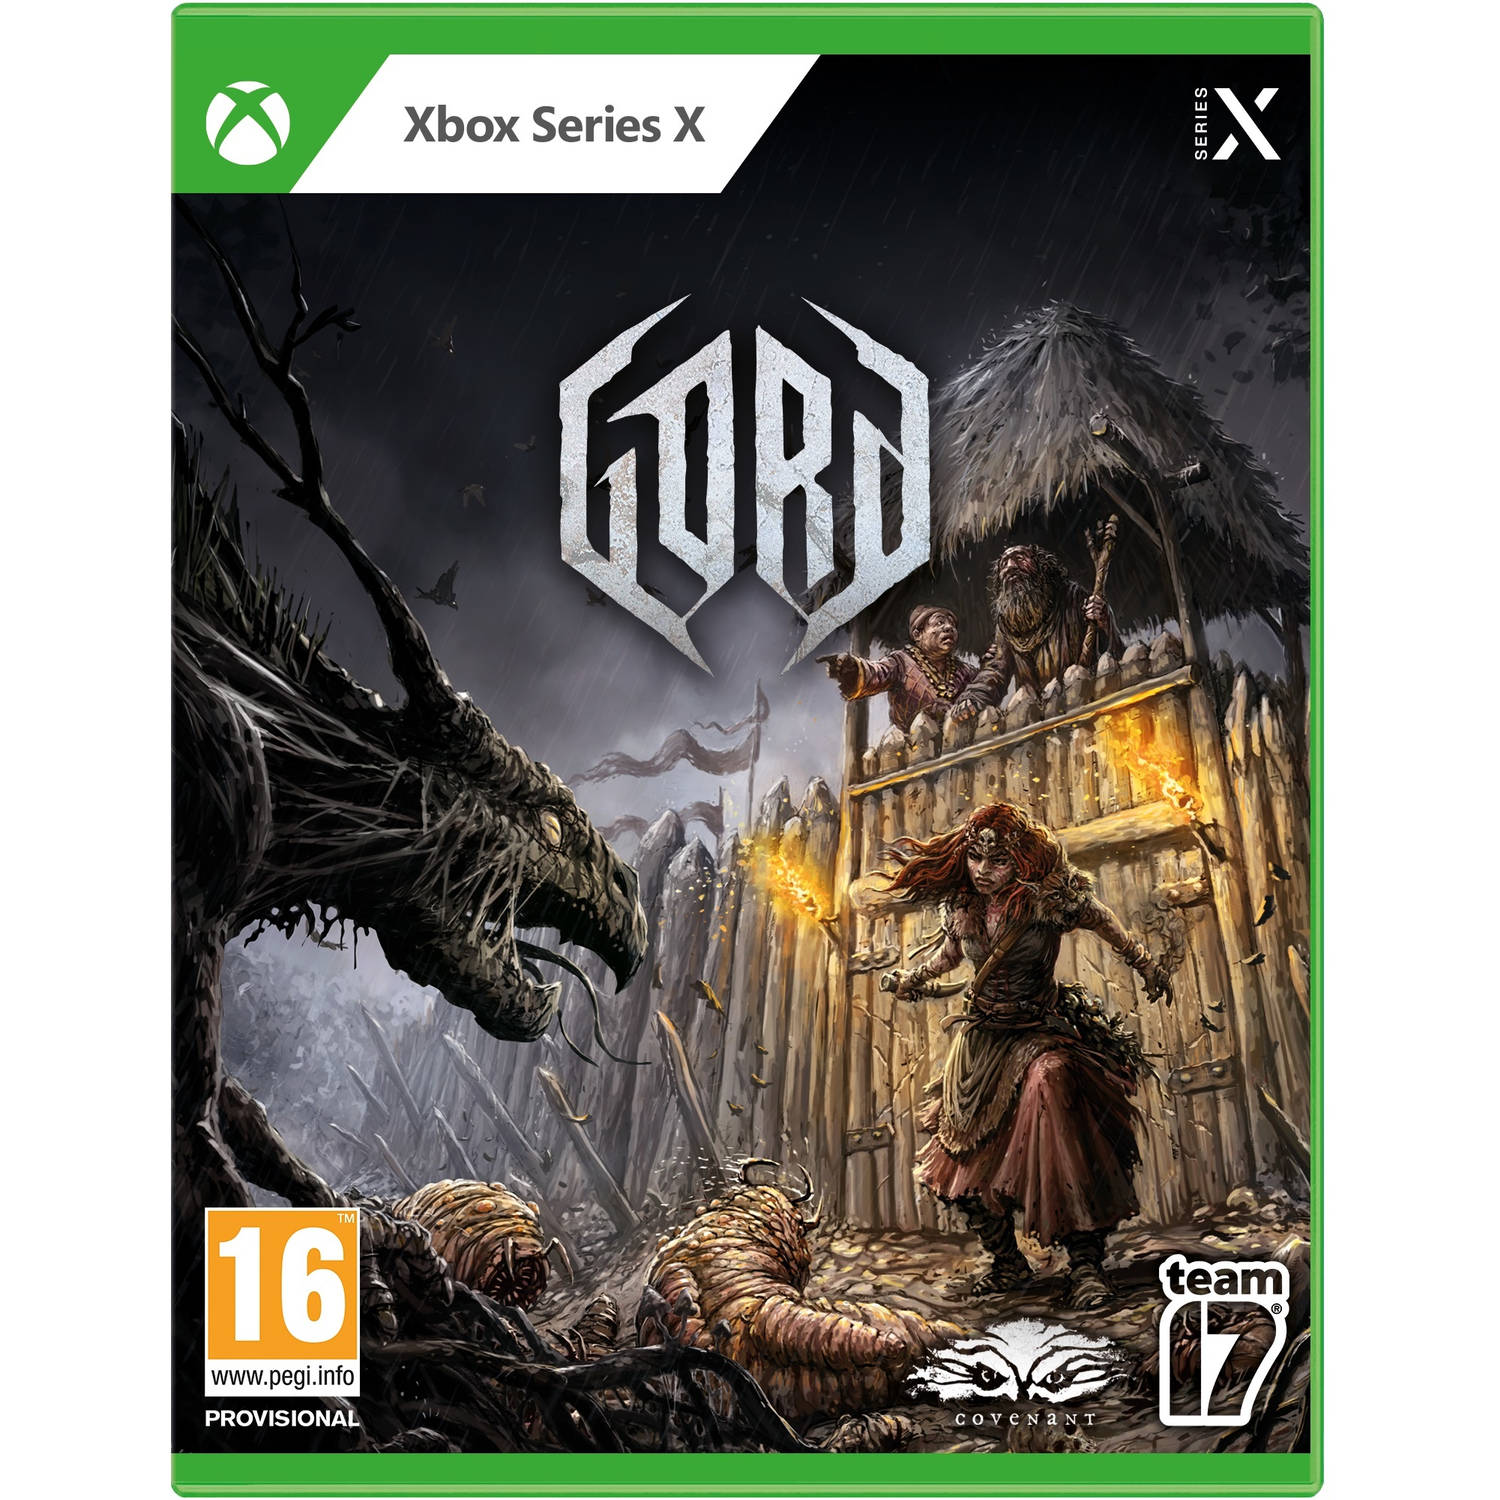 Gord Deluxe Edition Xbox Series X